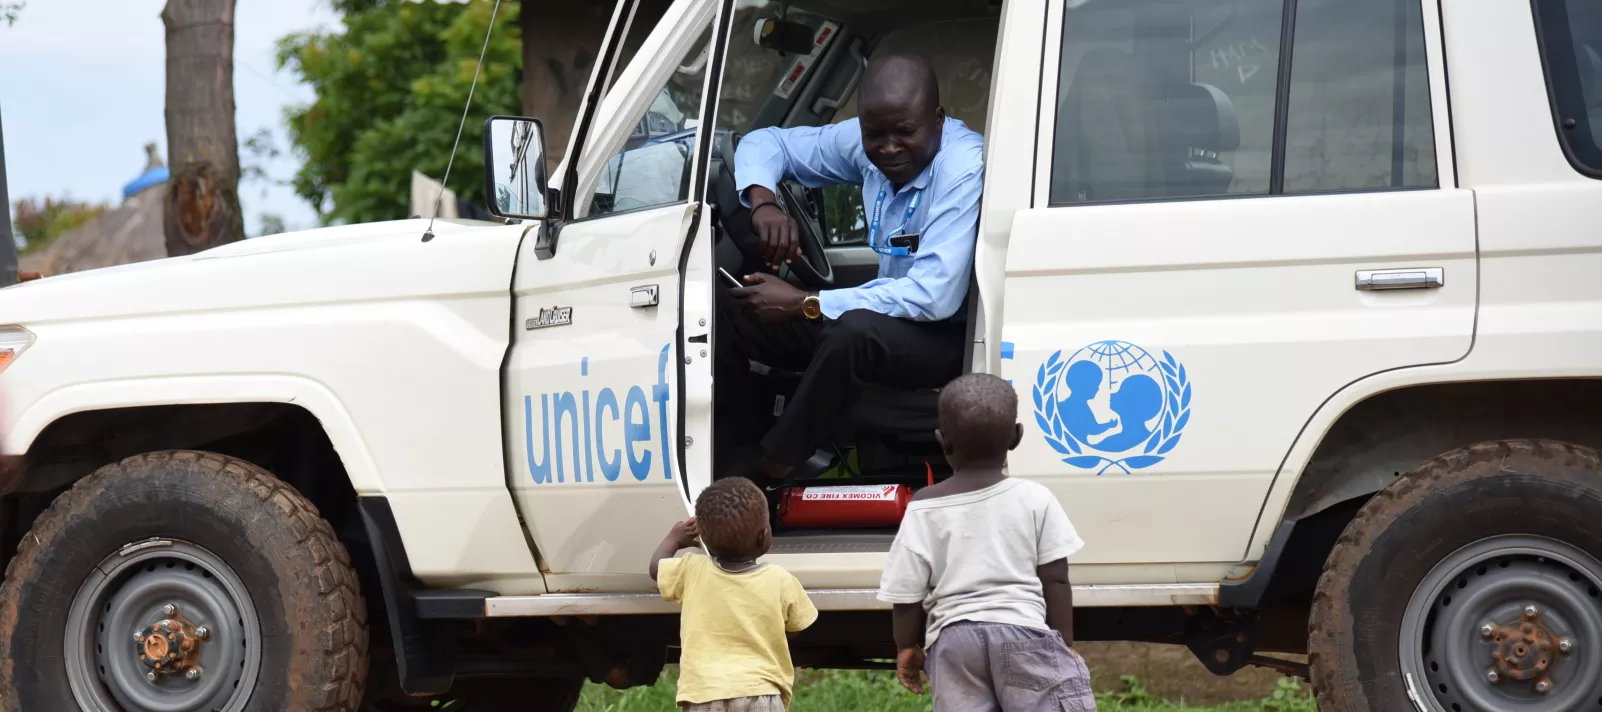 To children are approaching a UNICEF car and driver